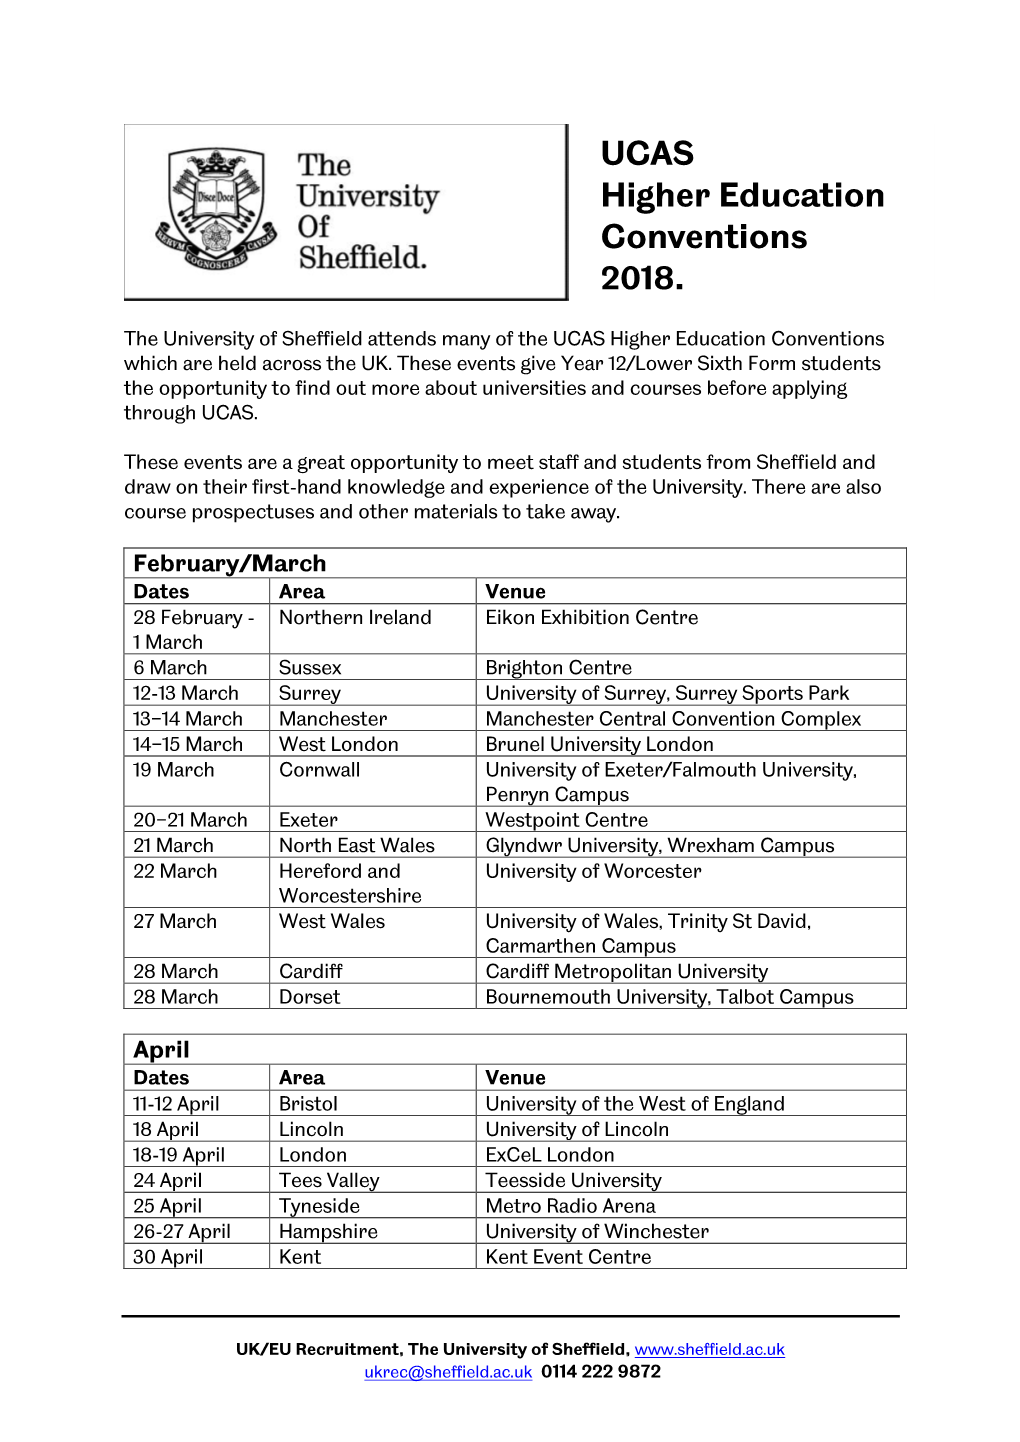 UCAS Higher Education Conventions 2018. the University of Sheffield Attends Many of the UCAS Higher Education Conventions Which Are Held Across the UK